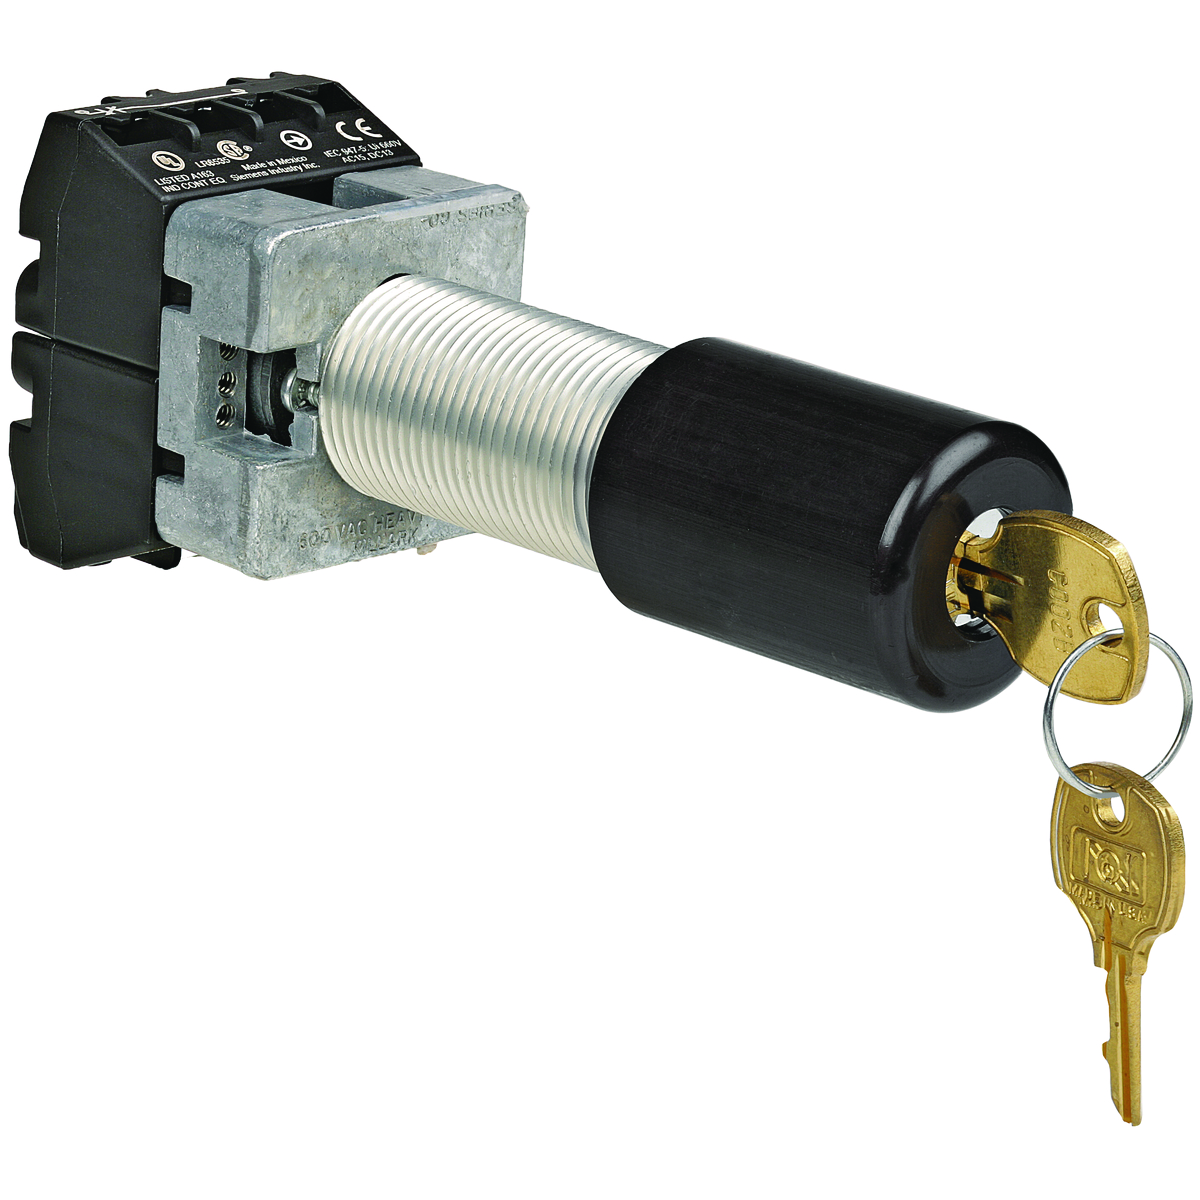 G SERIES - ALUMINUM SHORT MAINTAINED CONTACT 2-POSITION KEYED SELECTORSWITCH OPERATOR - KEYED ALIKE WITH KEY REMOVAL IN LEFT POSITION - 